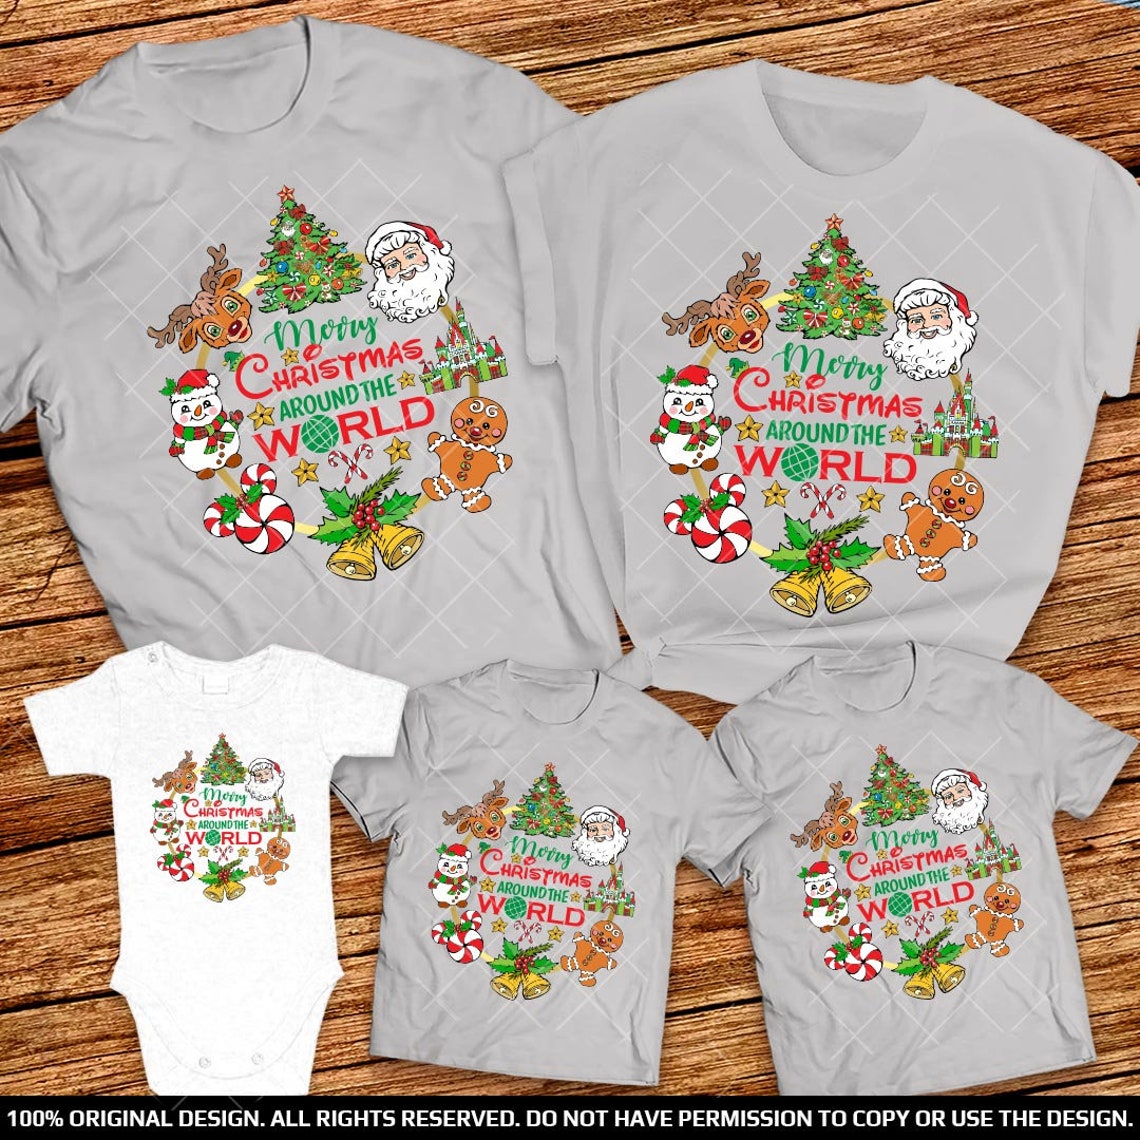 Epcot International Festival of the Holidays 2022 family shirts, Very Merry Christmas Party, Merry Christmas around the World Epcot shirts